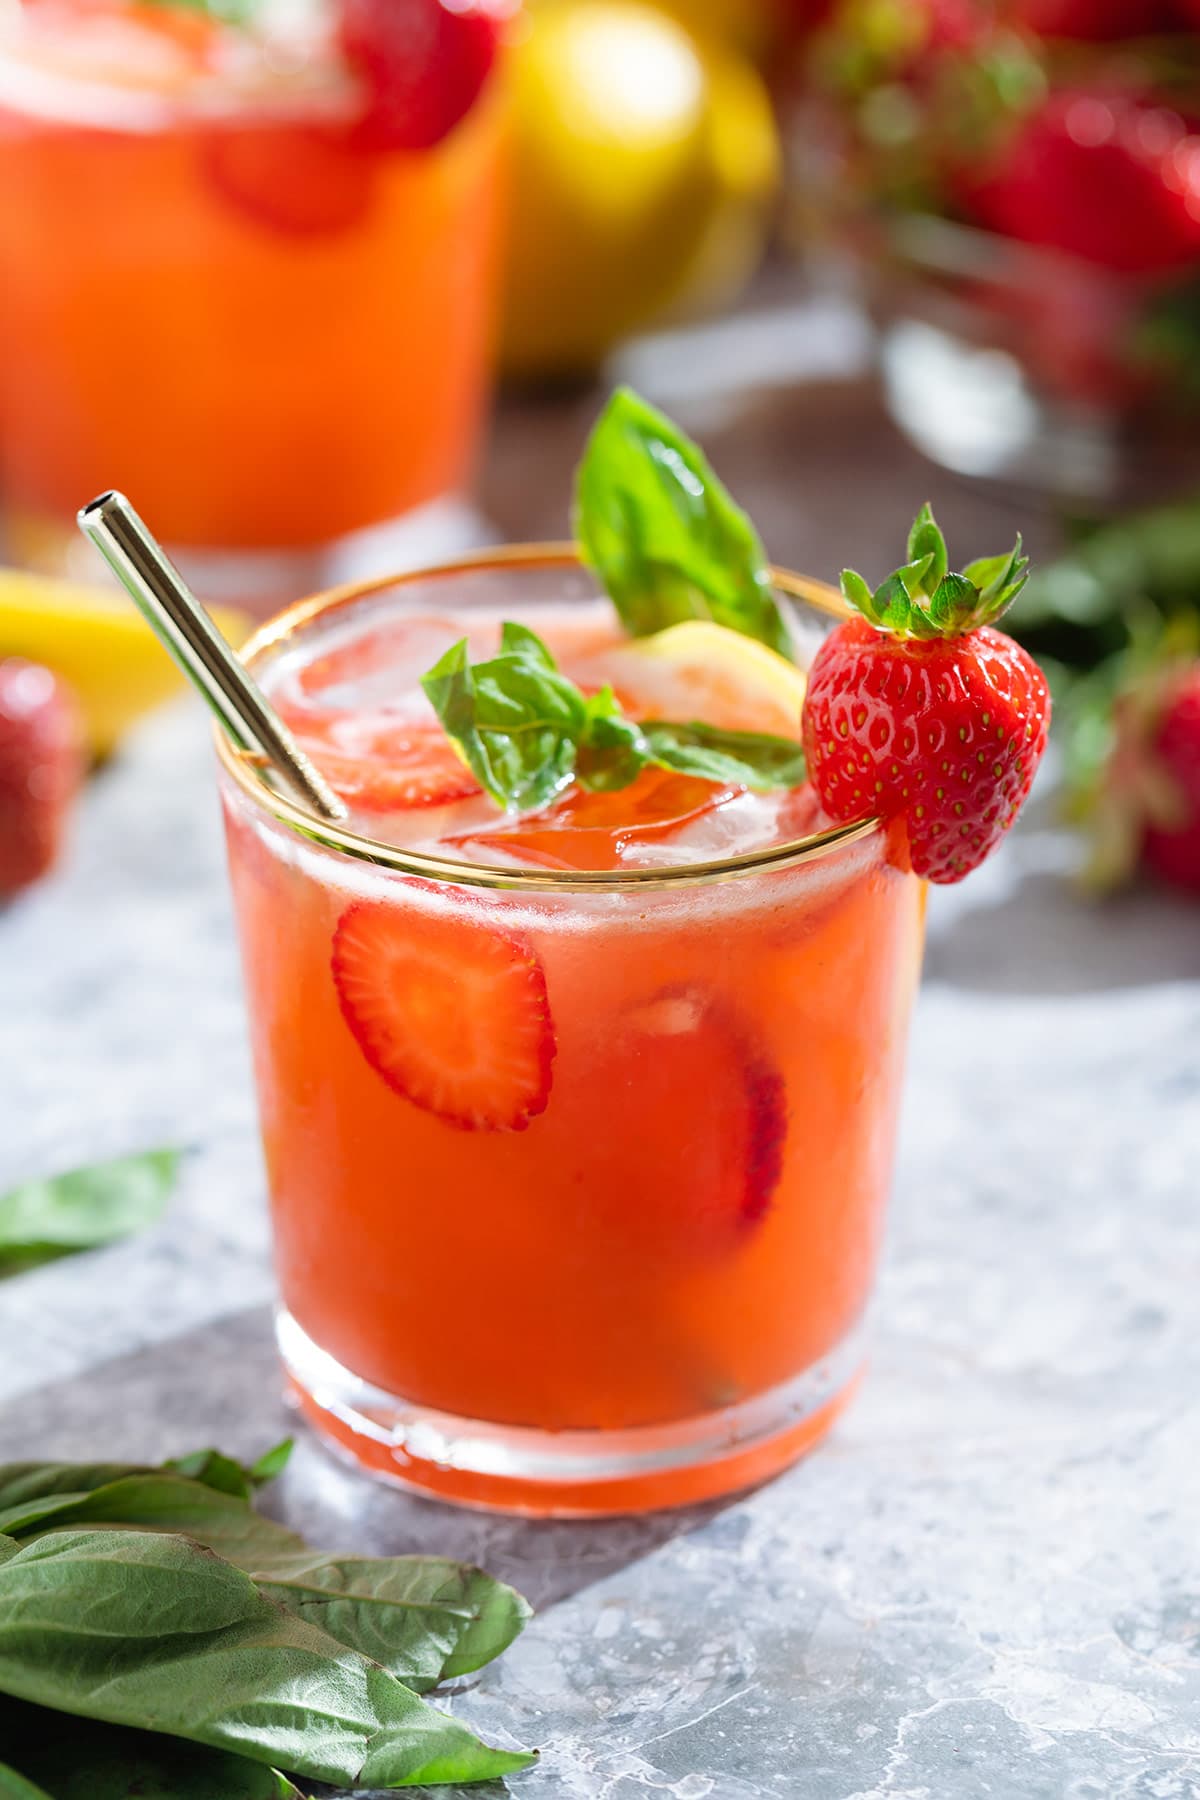 Bright red strawberry basil lemonade in a short glass with a gold rim garnished with a strawberry and fresh basil with a glass straw.